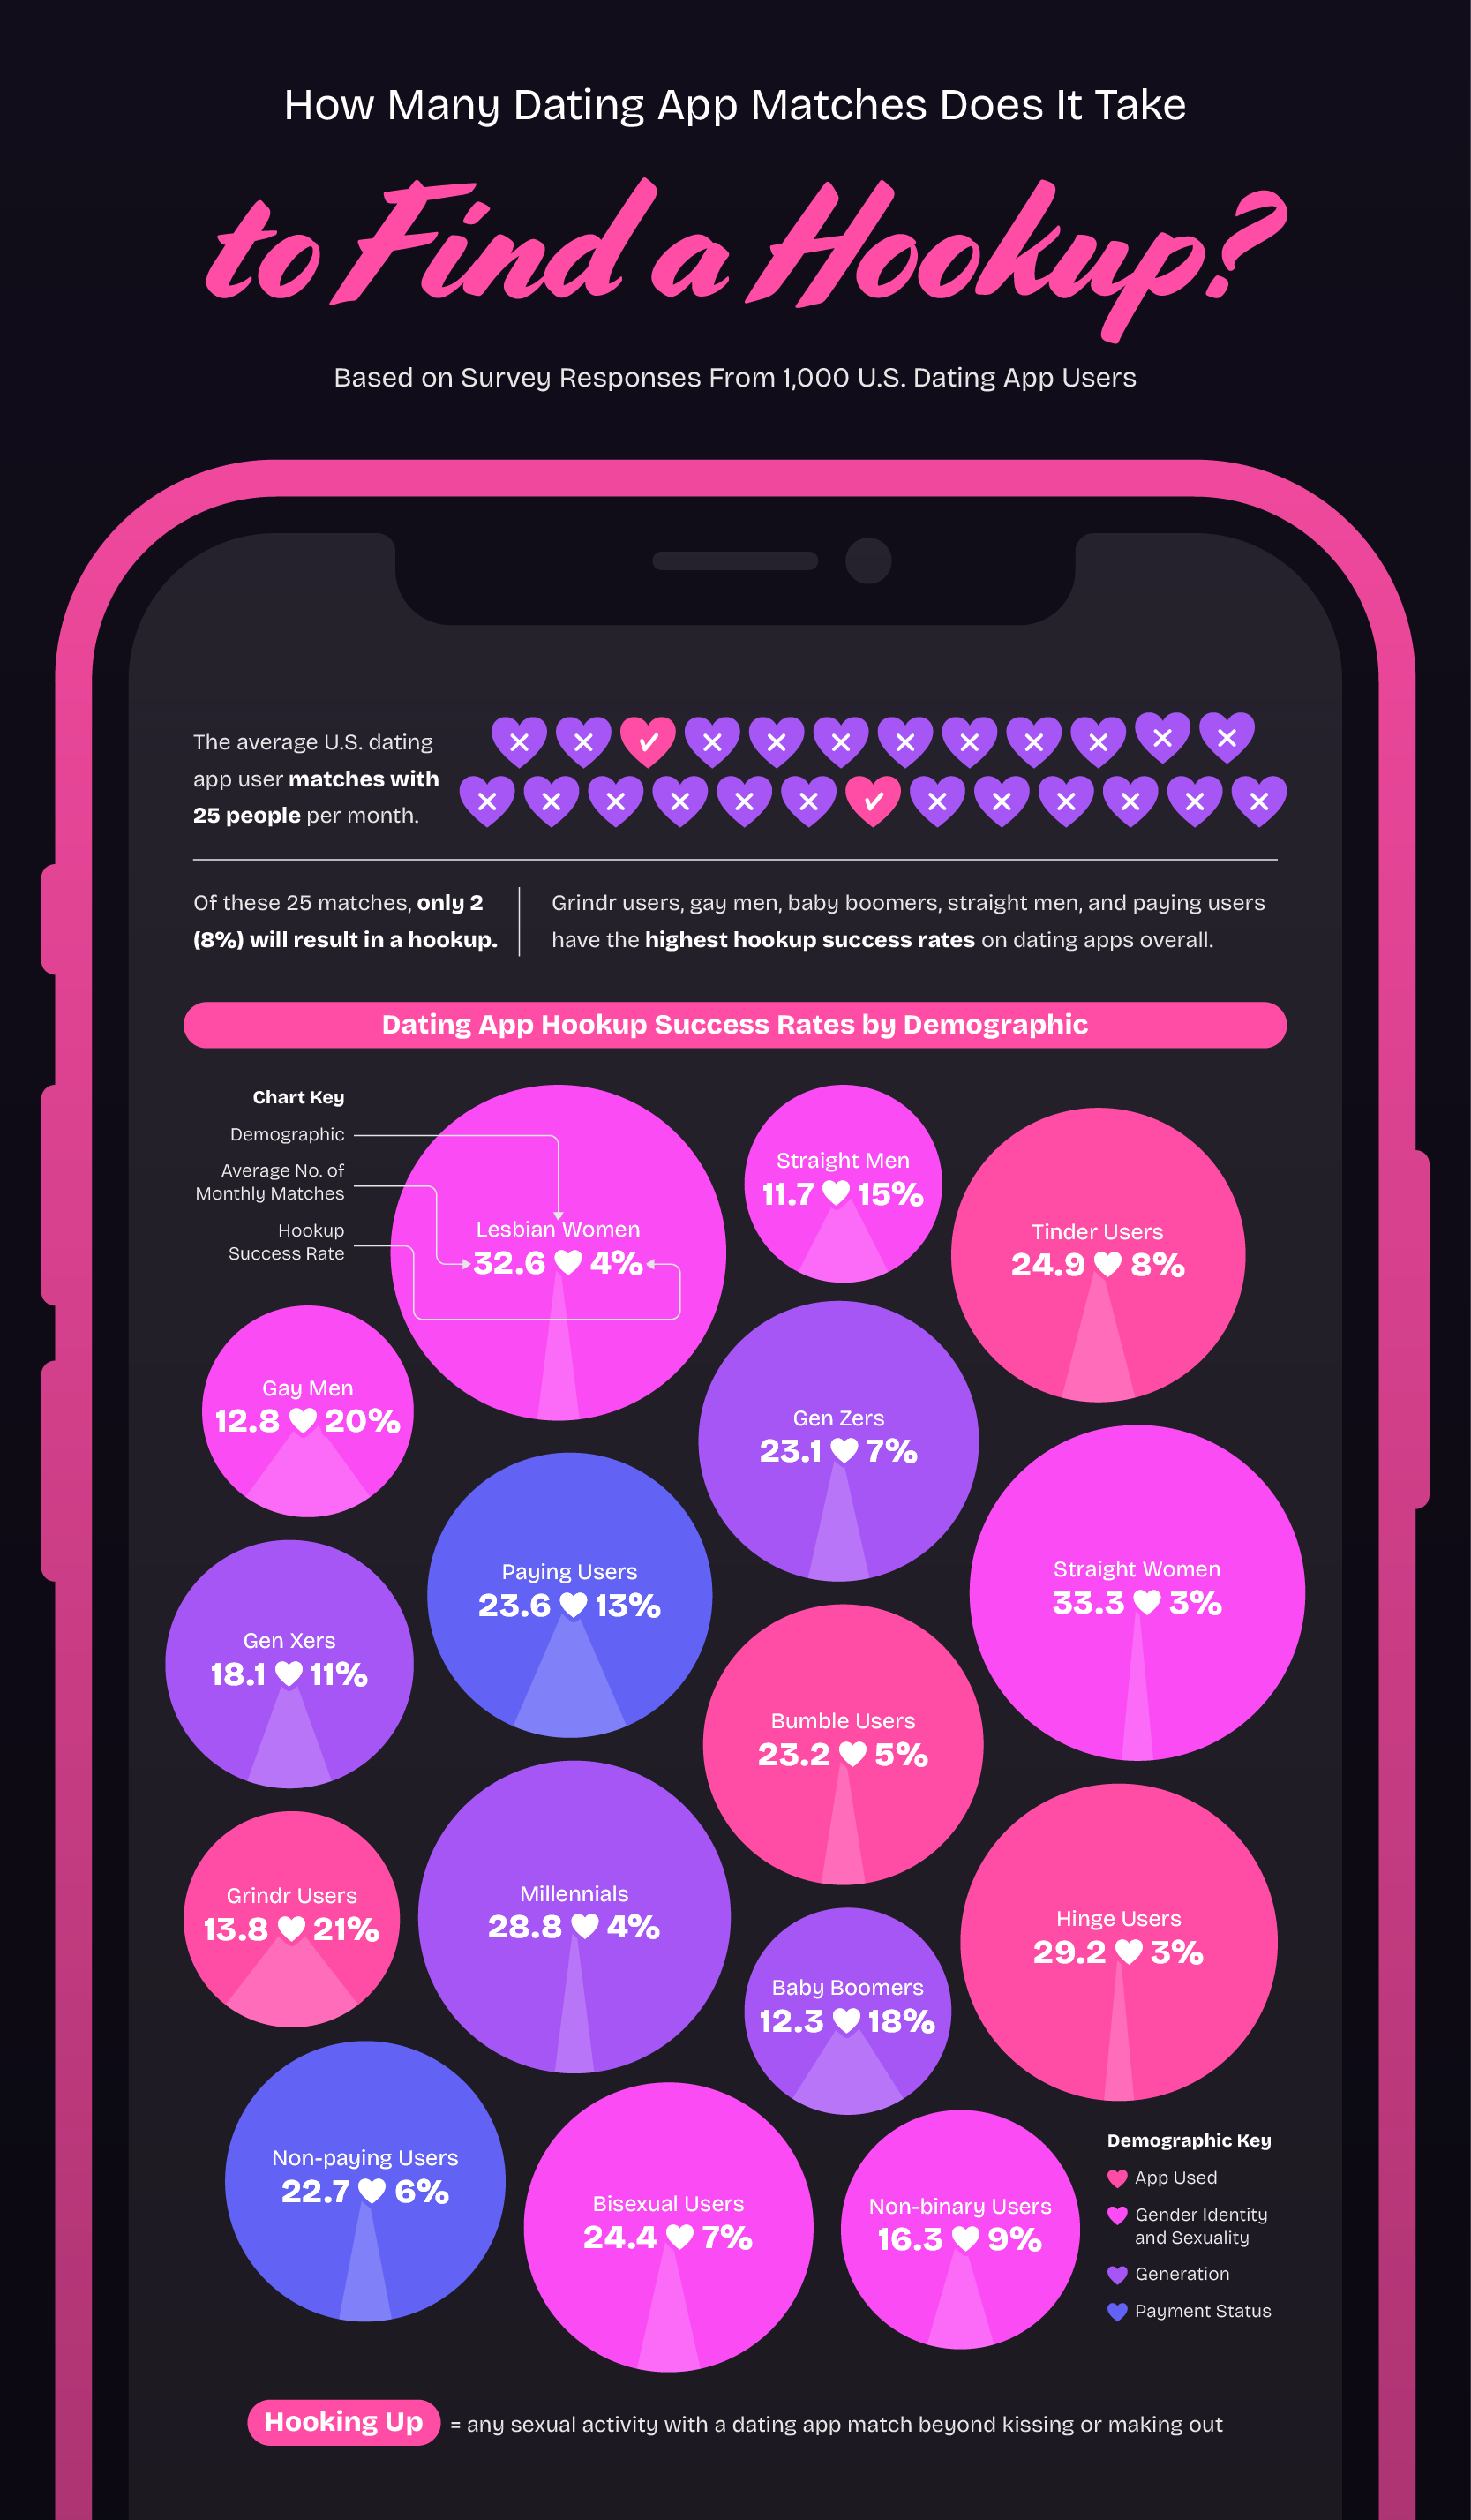 an infographic showing what percentage of dating app matches lead to hookups?